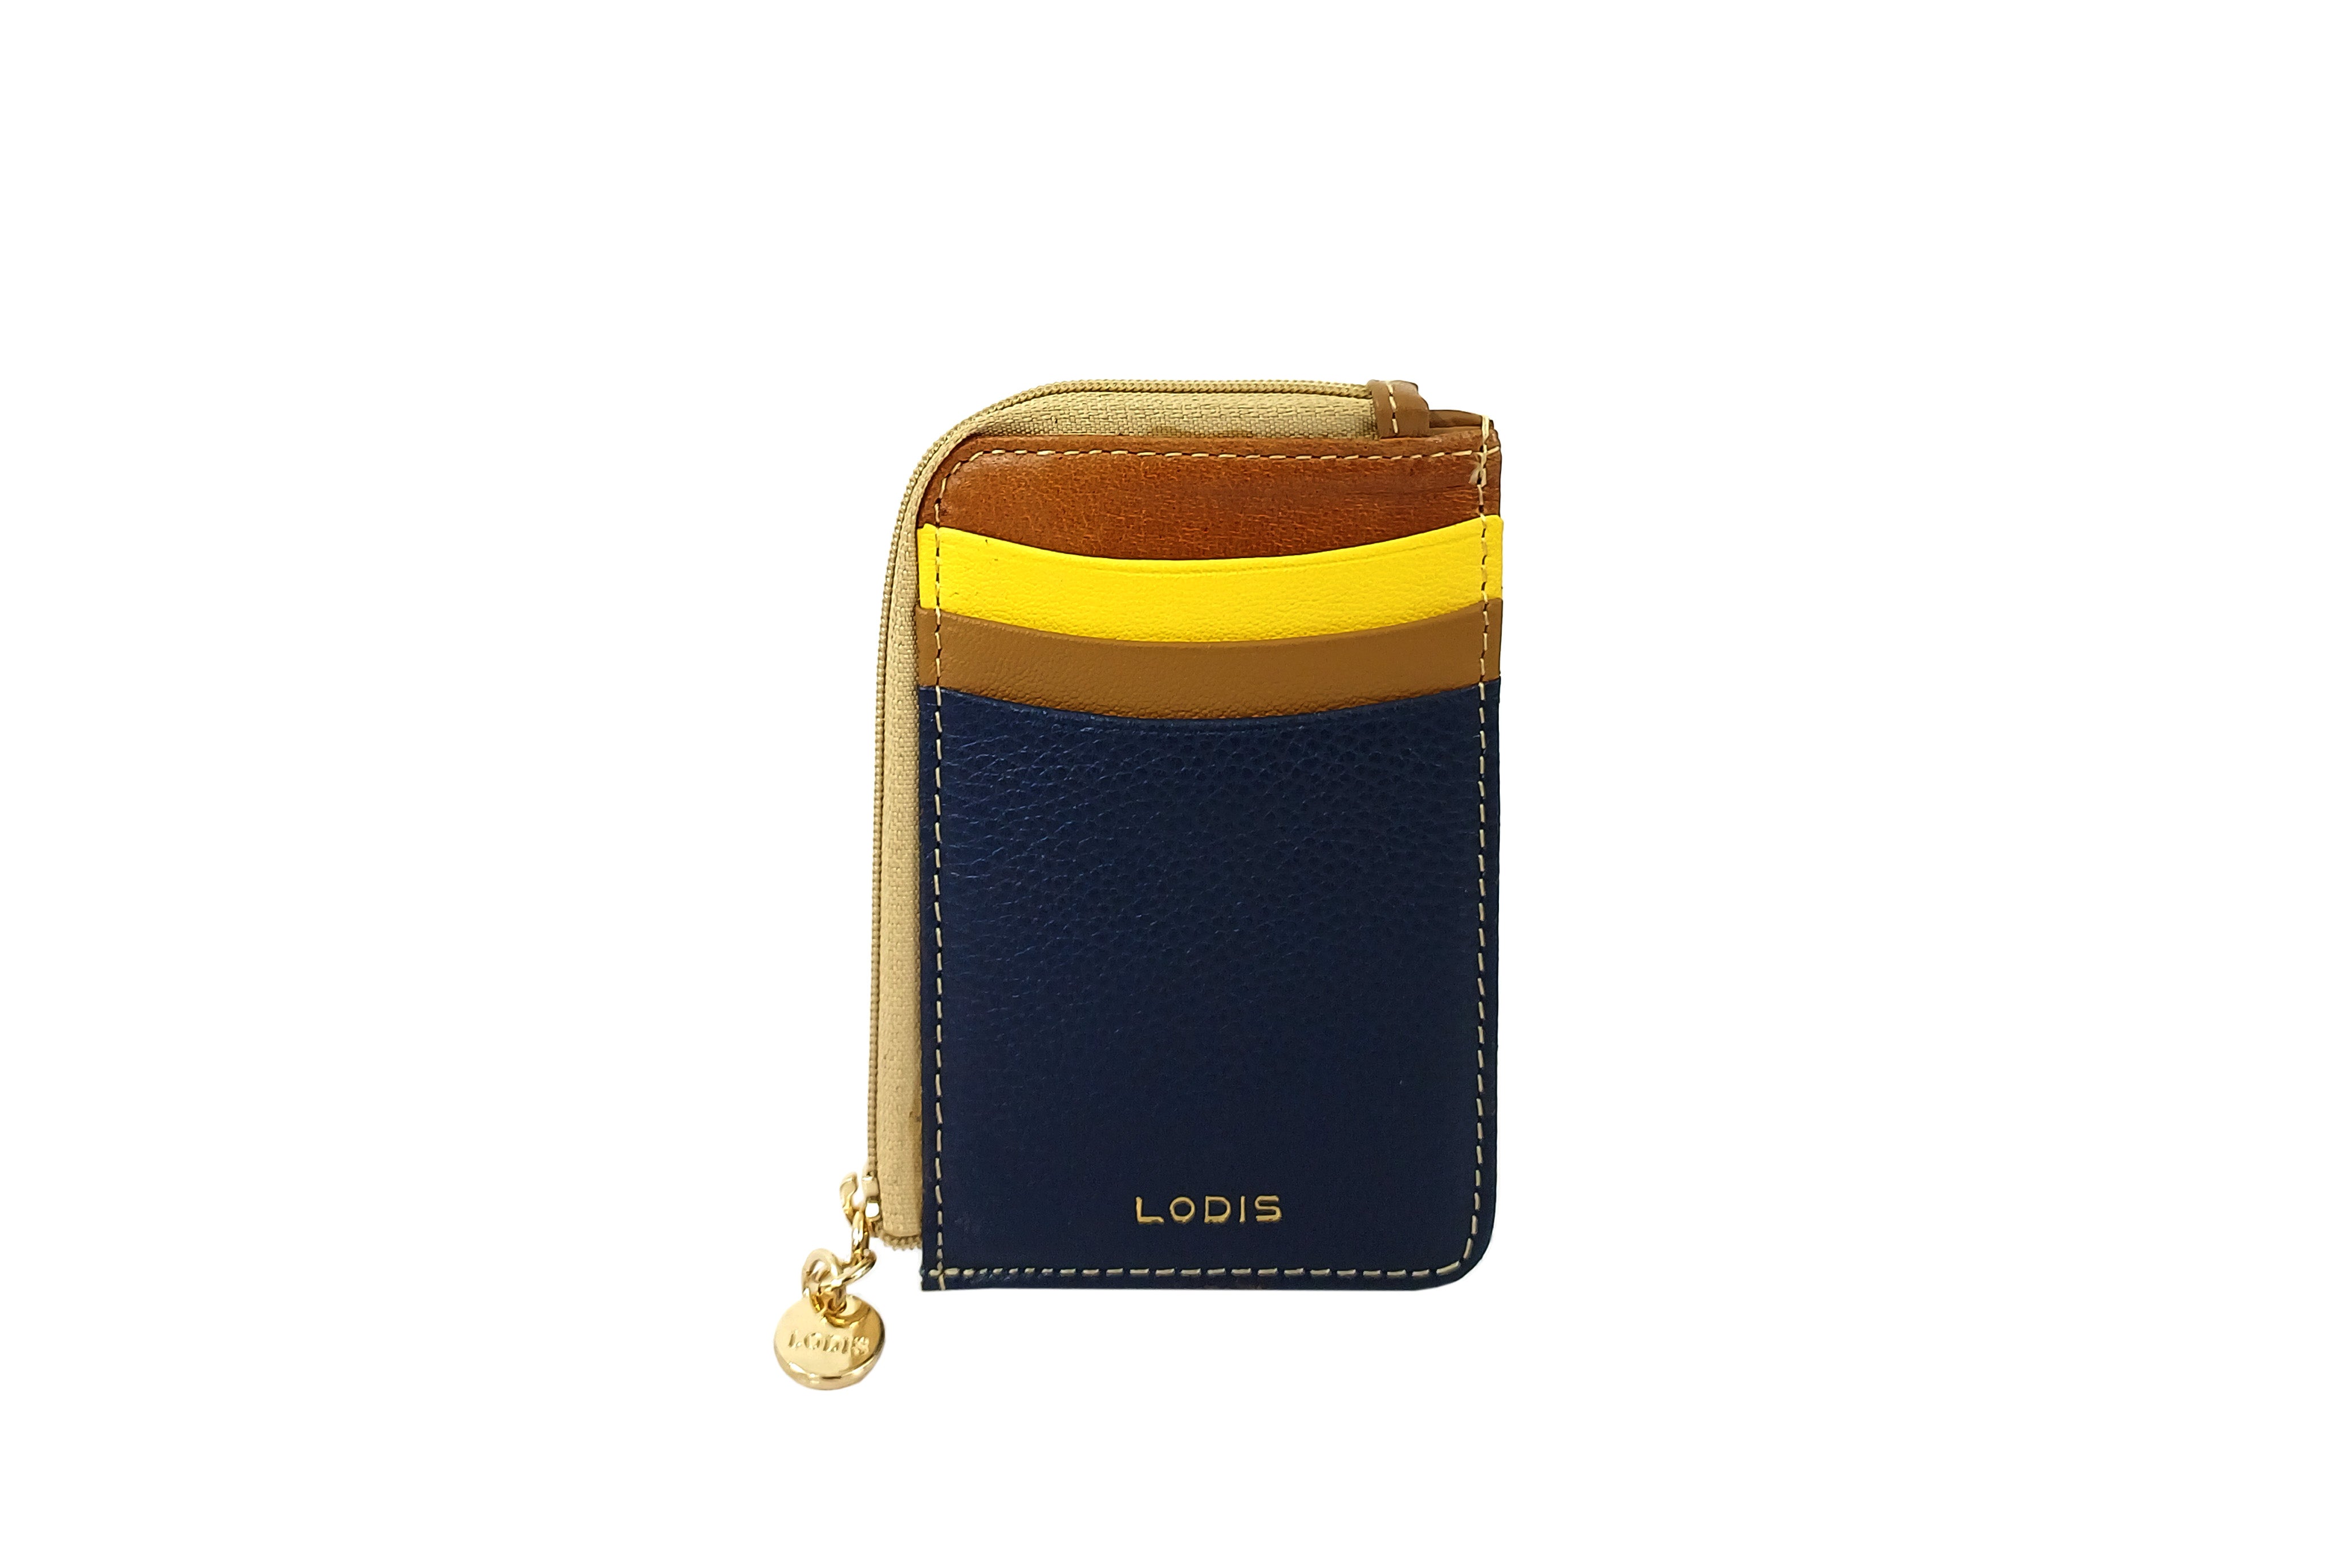 Shop Now The Compact & Stylish Card Cases | Lodis